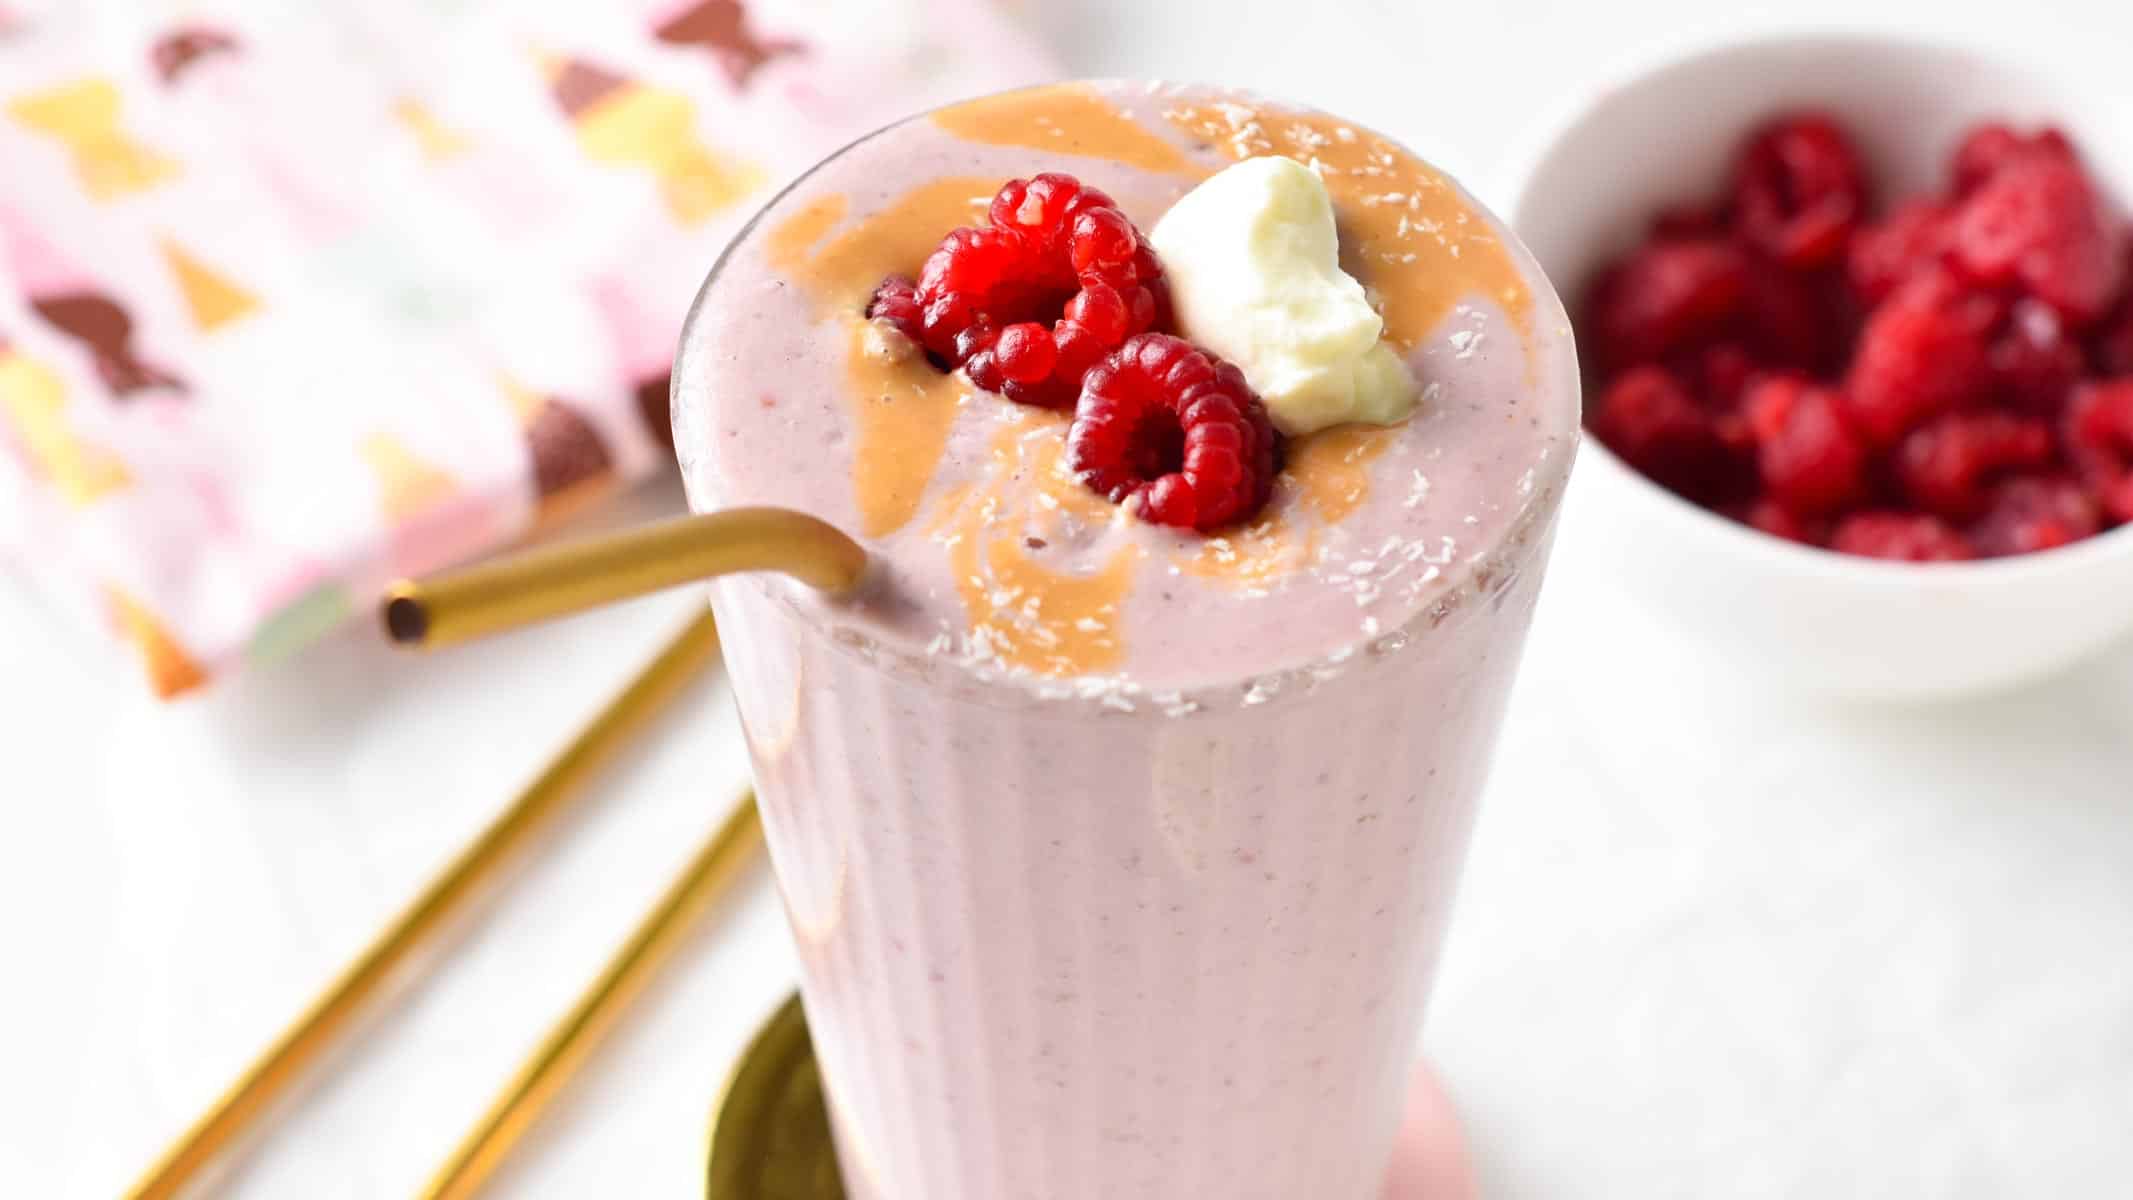 Post-Workout Protein Smoothie Recipe with Next Level Ingredients